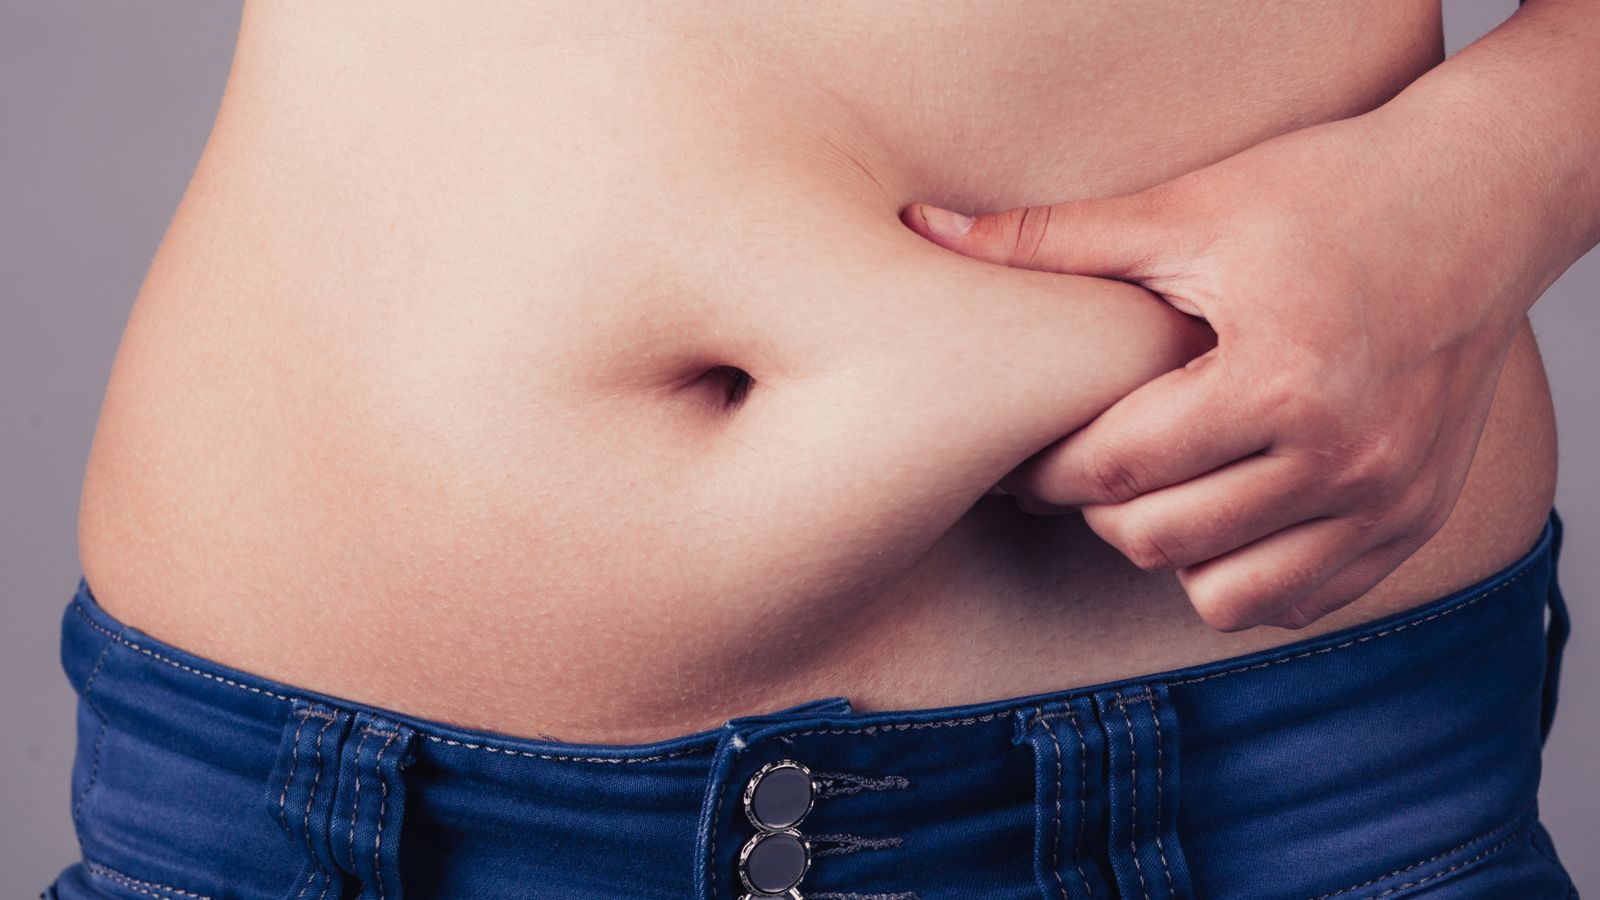 Skinny fat cells could contribute to future weight gain, study reveals | Science & Technology Update